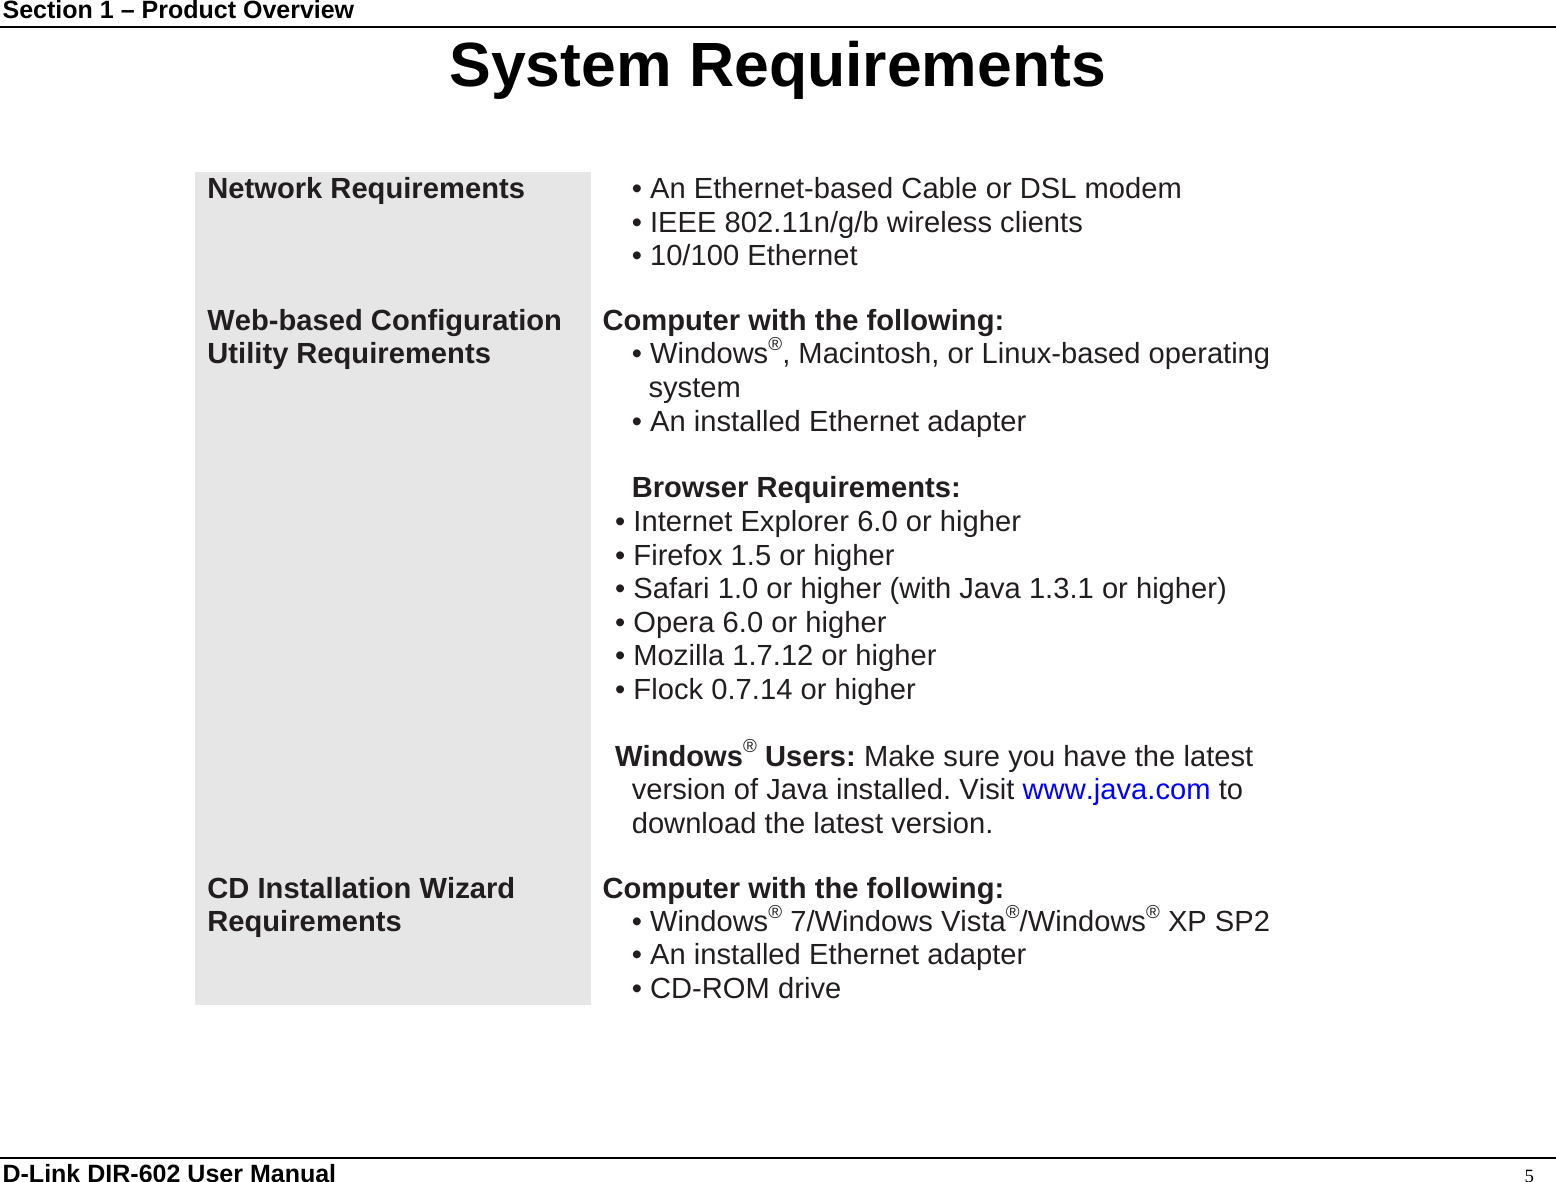 Section 1 – Product Overview  D-Link DIR-602 User Manual                                                                                               5 System Requirements  Network Requirements  • An Ethernet-based Cable or DSL modem • IEEE 802.11n/g/b wireless clients • 10/100 Ethernet  Web-based Configuration Utility Requirements Computer with the following: • Windows®, Macintosh, or Linux-based operating system • An installed Ethernet adapter  Browser Requirements: • Internet Explorer 6.0 or higher • Firefox 1.5 or higher • Safari 1.0 or higher (with Java 1.3.1 or higher)   • Opera 6.0 or higher   • Mozilla 1.7.12 or higher • Flock 0.7.14 or higher  Windows® Users: Make sure you have the latest version of Java installed. Visit www.java.com to download the latest version.  CD Installation Wizard Requirements Computer with the following: • Windows® 7/Windows Vista®/Windows® XP SP2 • An installed Ethernet adapter • CD-ROM drive  